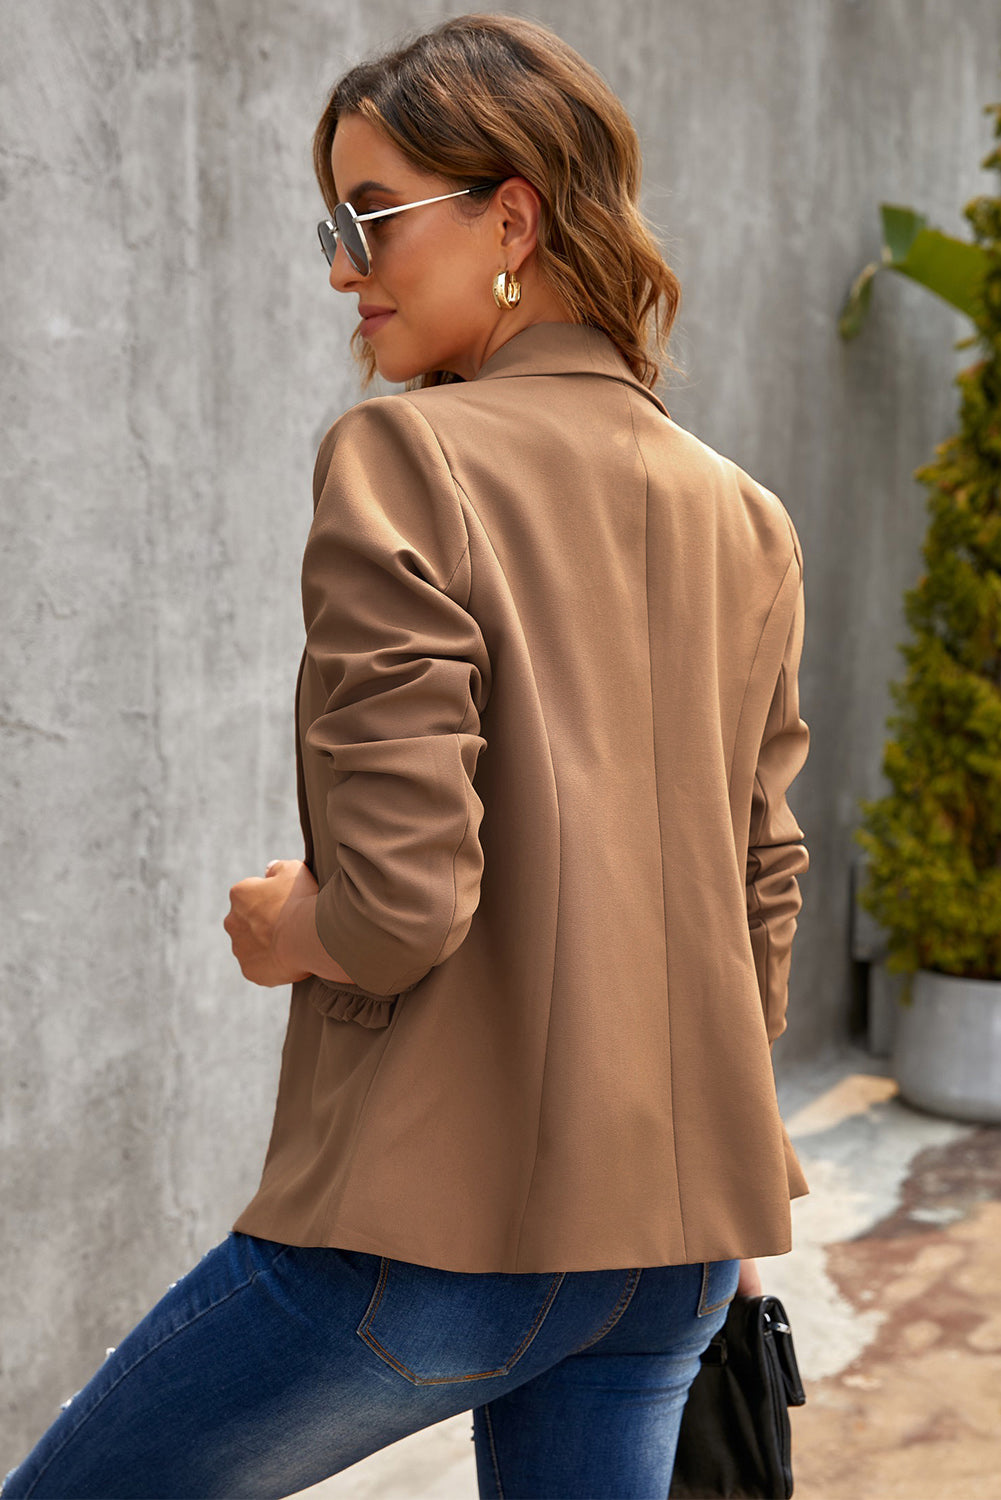 Lapel Collared Blazer with Ruffle Pockets in Brown and Beige  Southern Soul Collectives 